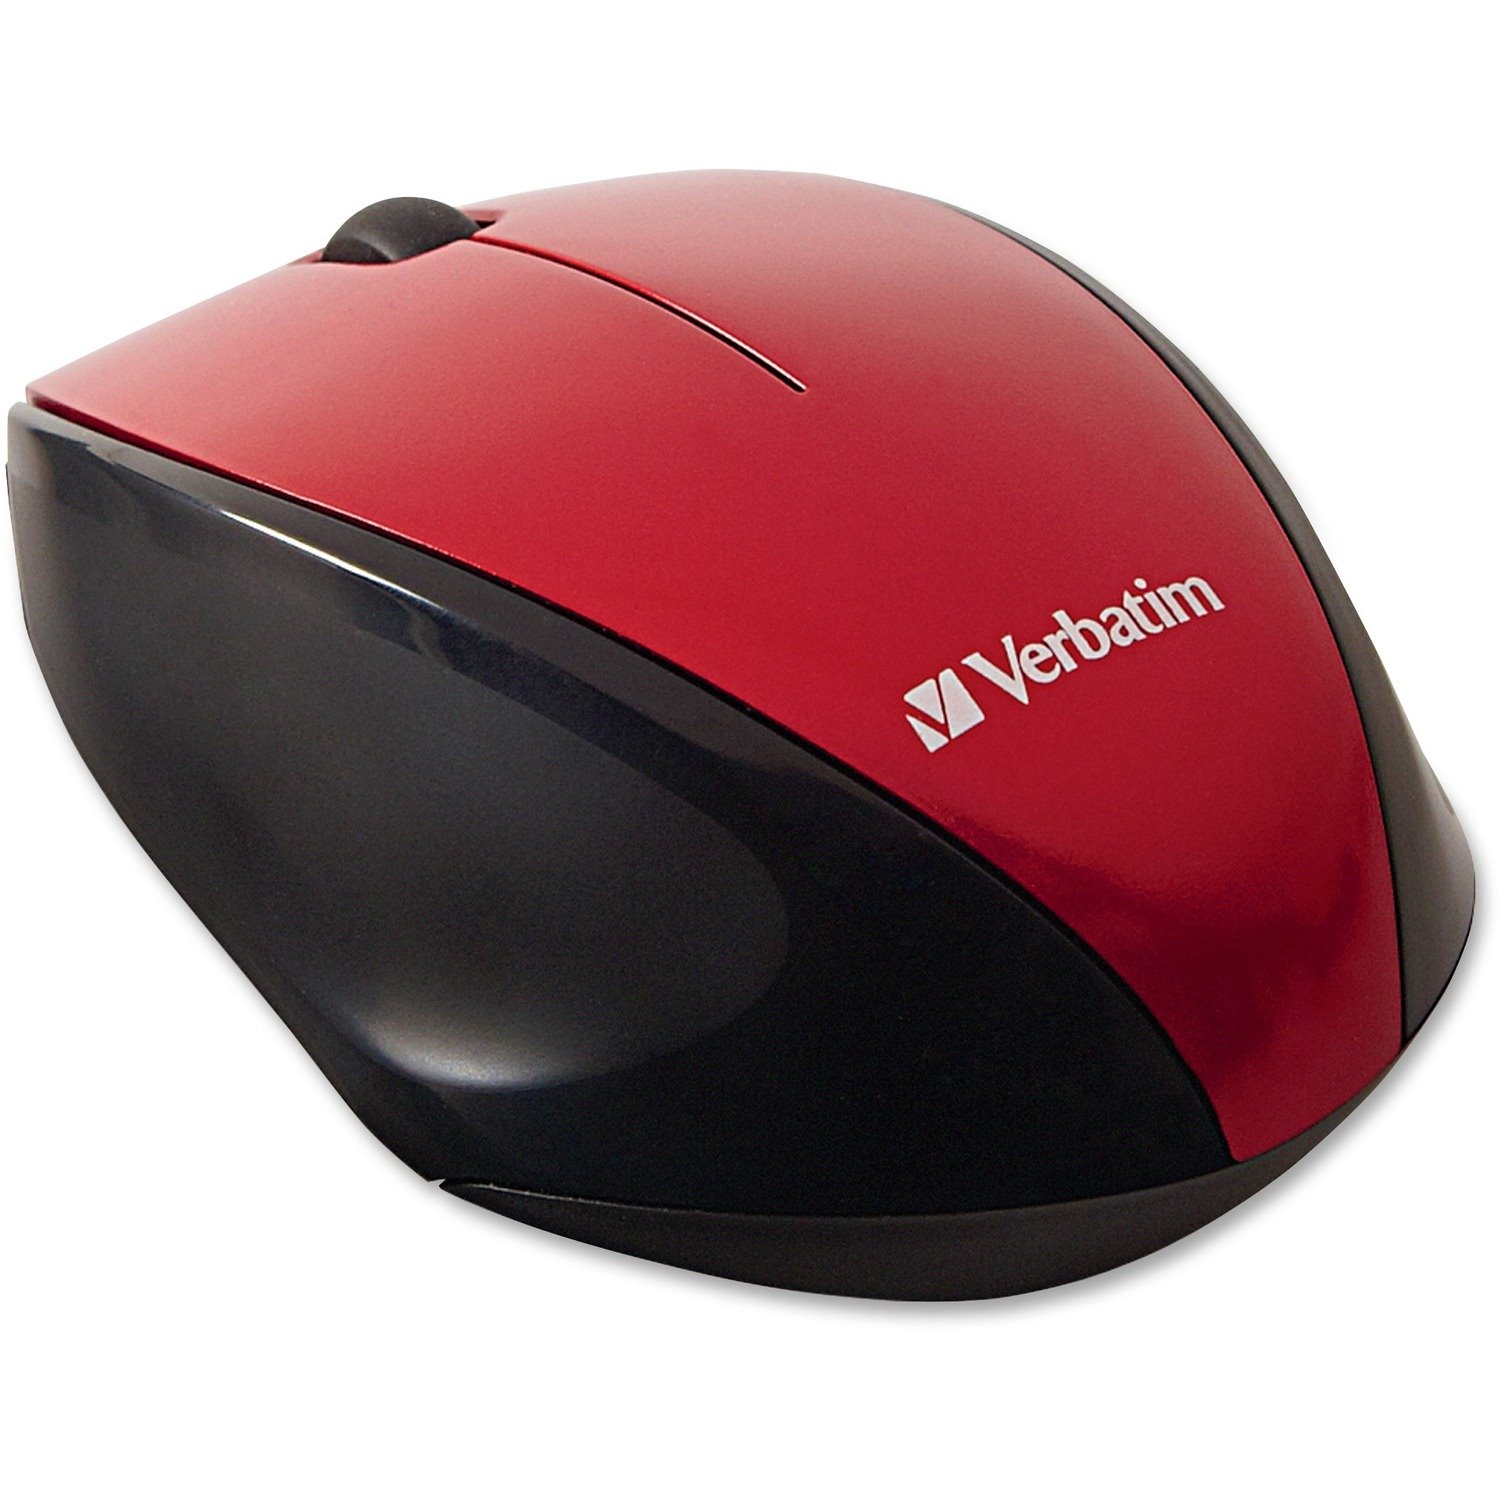 Verbatim Mouse - Radio Frequency - USB 2.0 - Blue Optical - 3 Button(s) - Red - 1 Pack